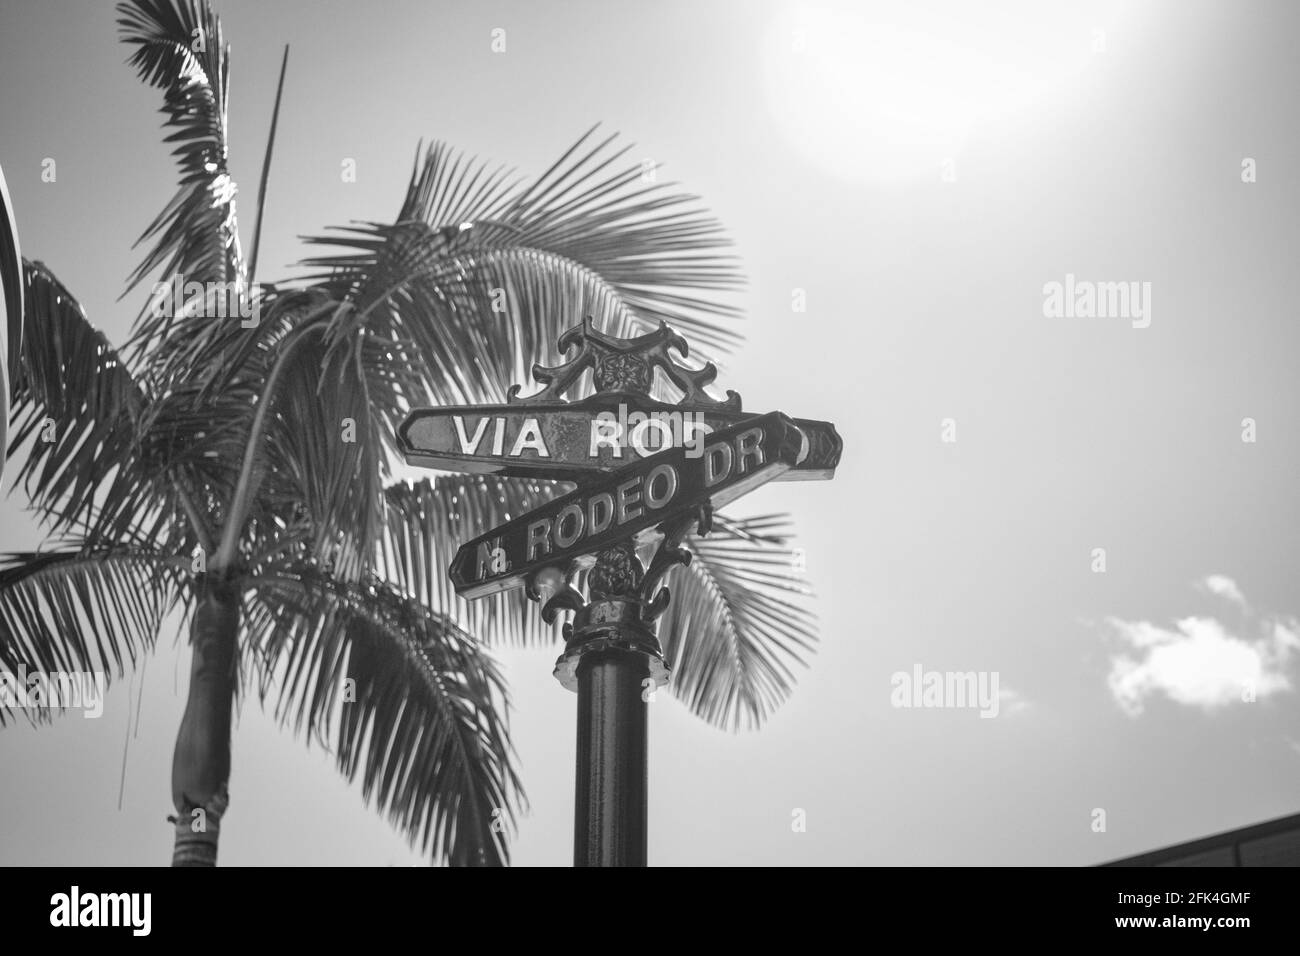 LOS ANGELES, UNITED STATES - Oct 28, 2013: Los Angeles, United States,  October 2018: Via Rodeo drive street sign in black and white Stock Photo